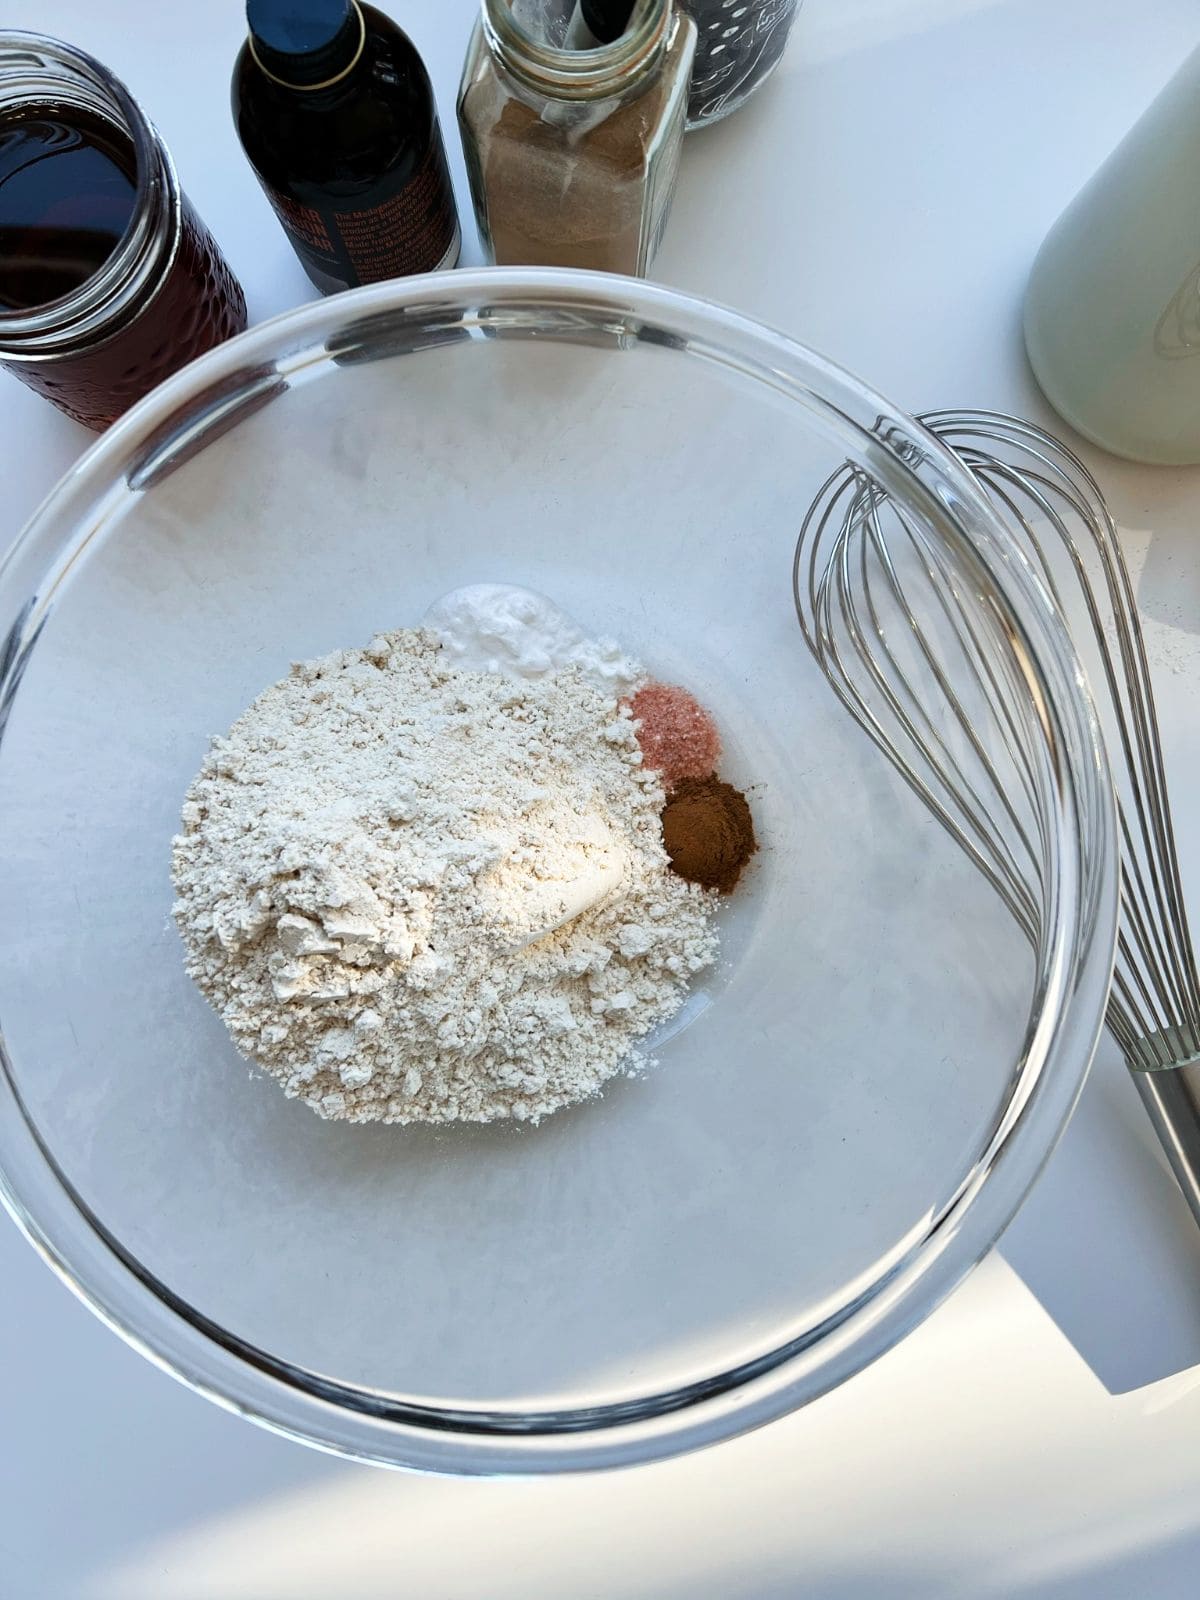 An image of the dry ingredients need for the recipe, in a glass bowl.